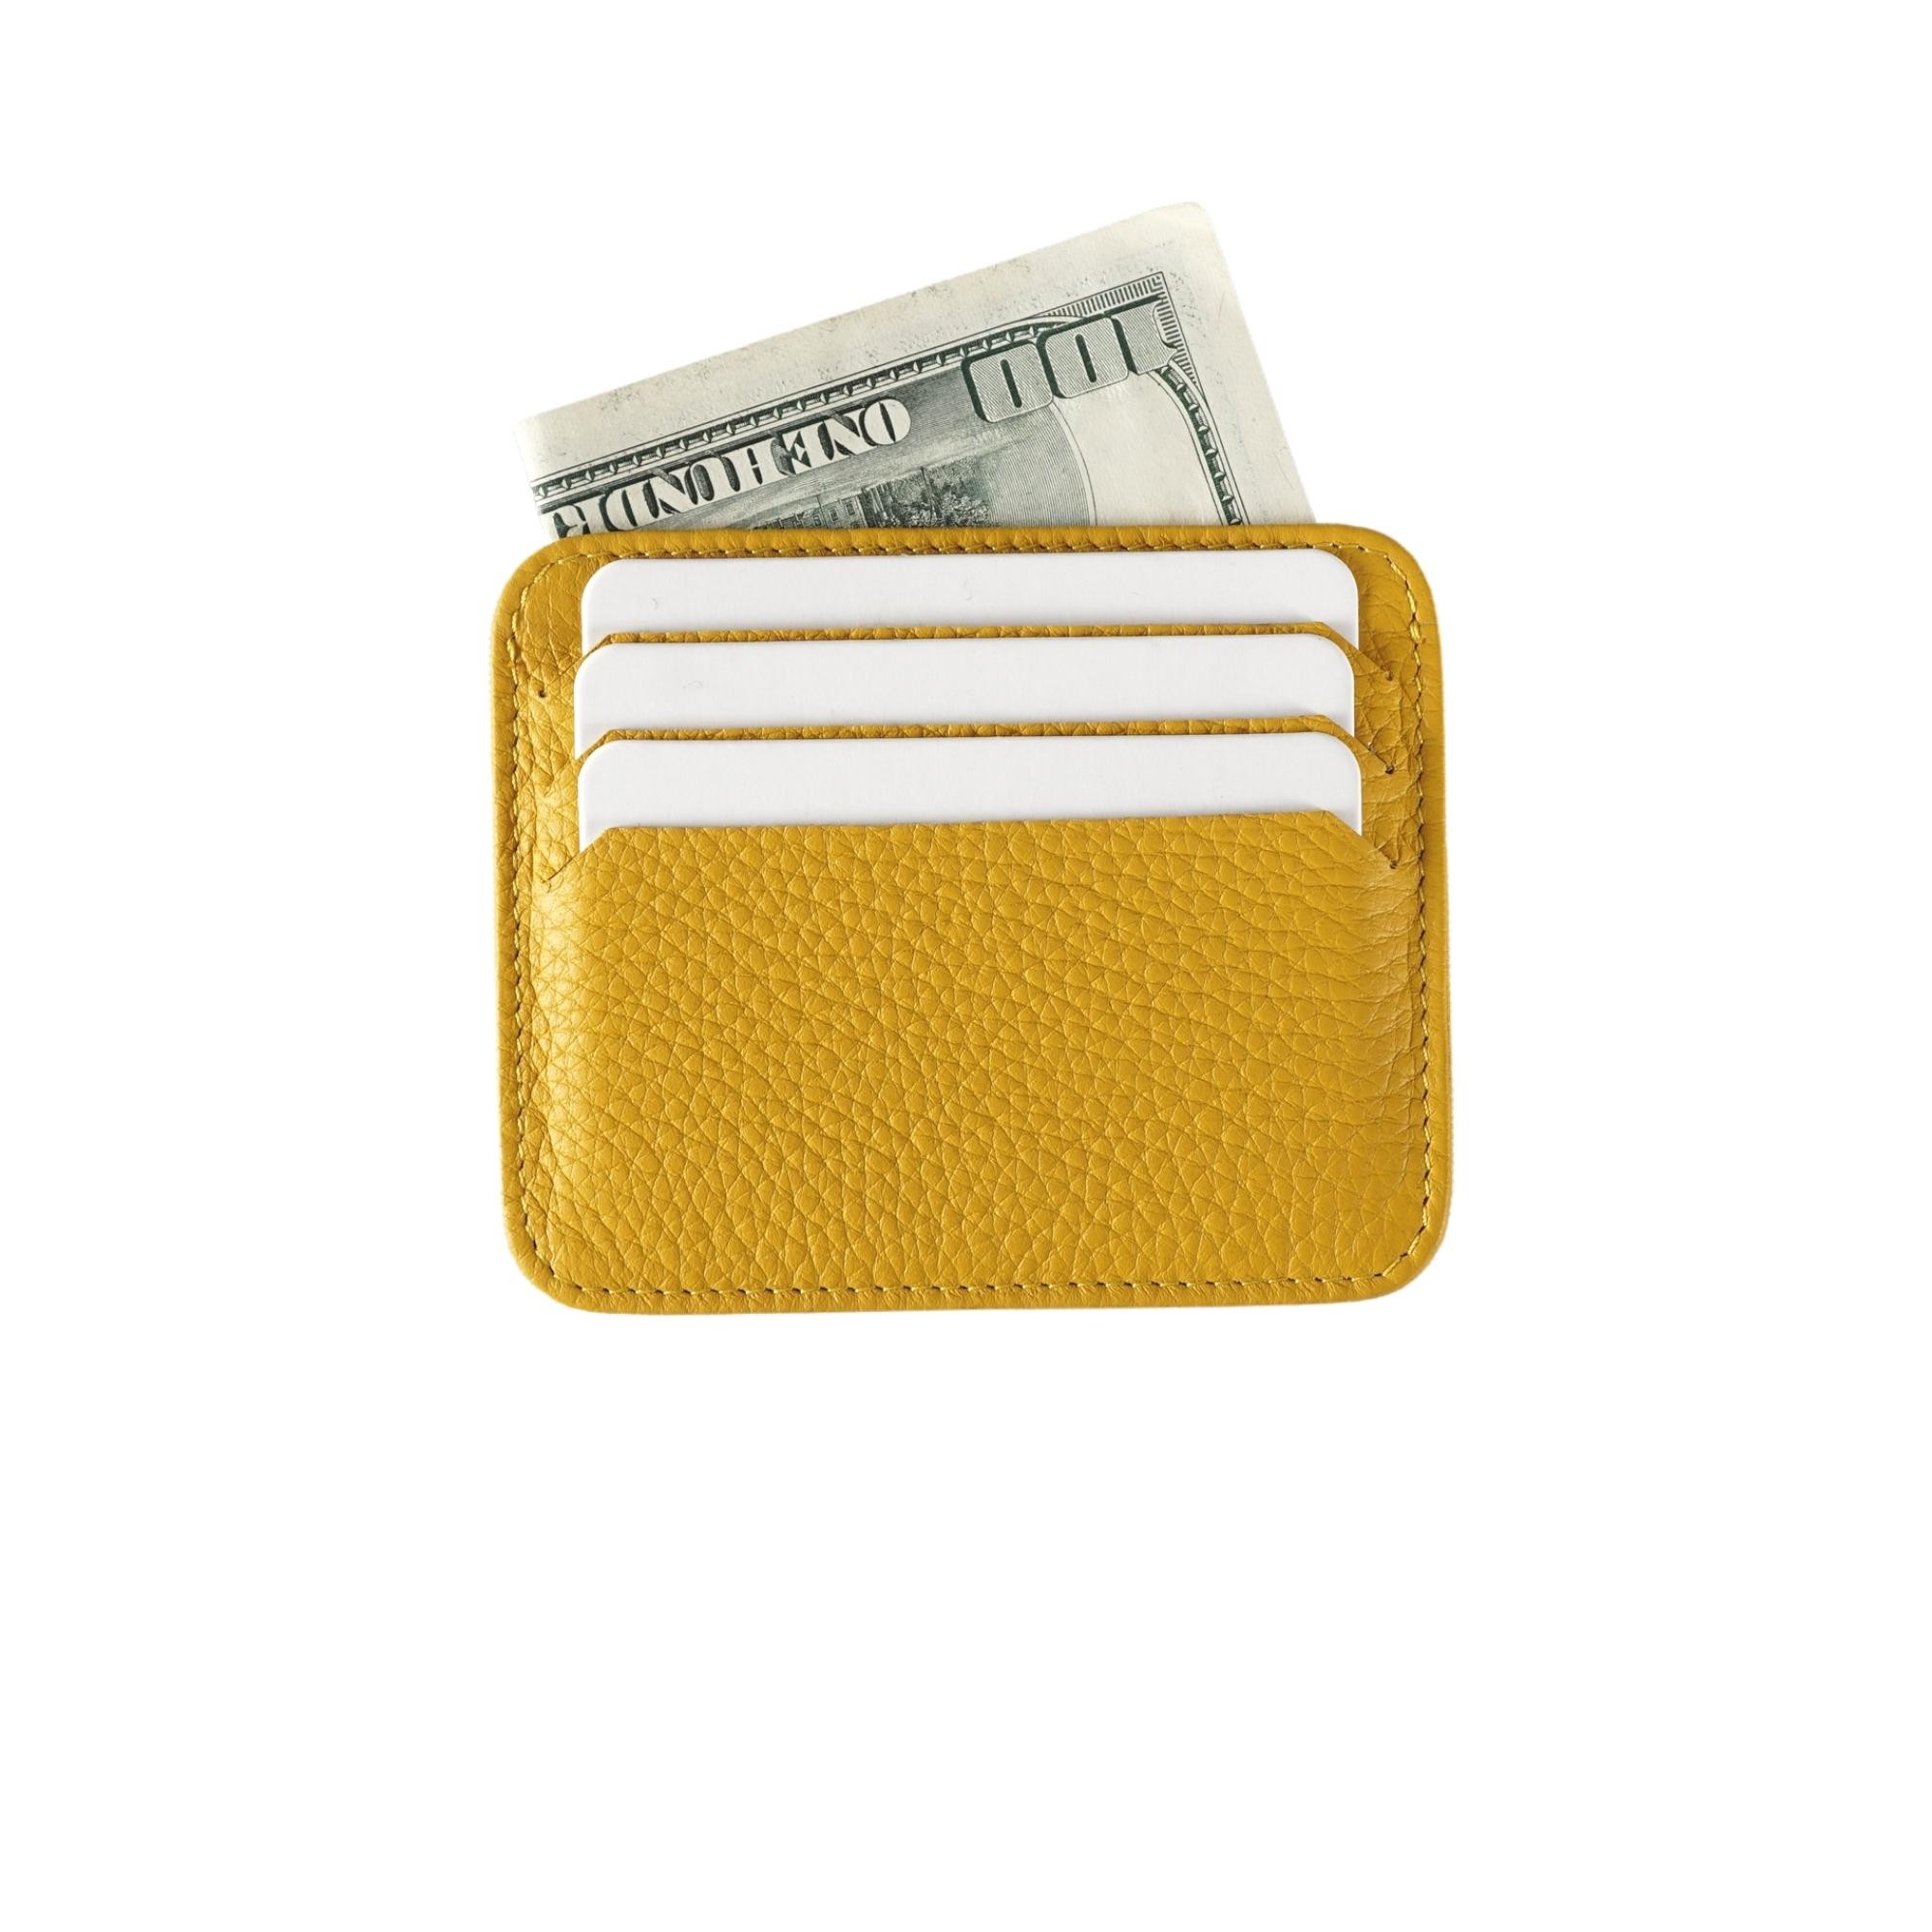 Genuine Leather 6-1 Card Holder  - Yellow